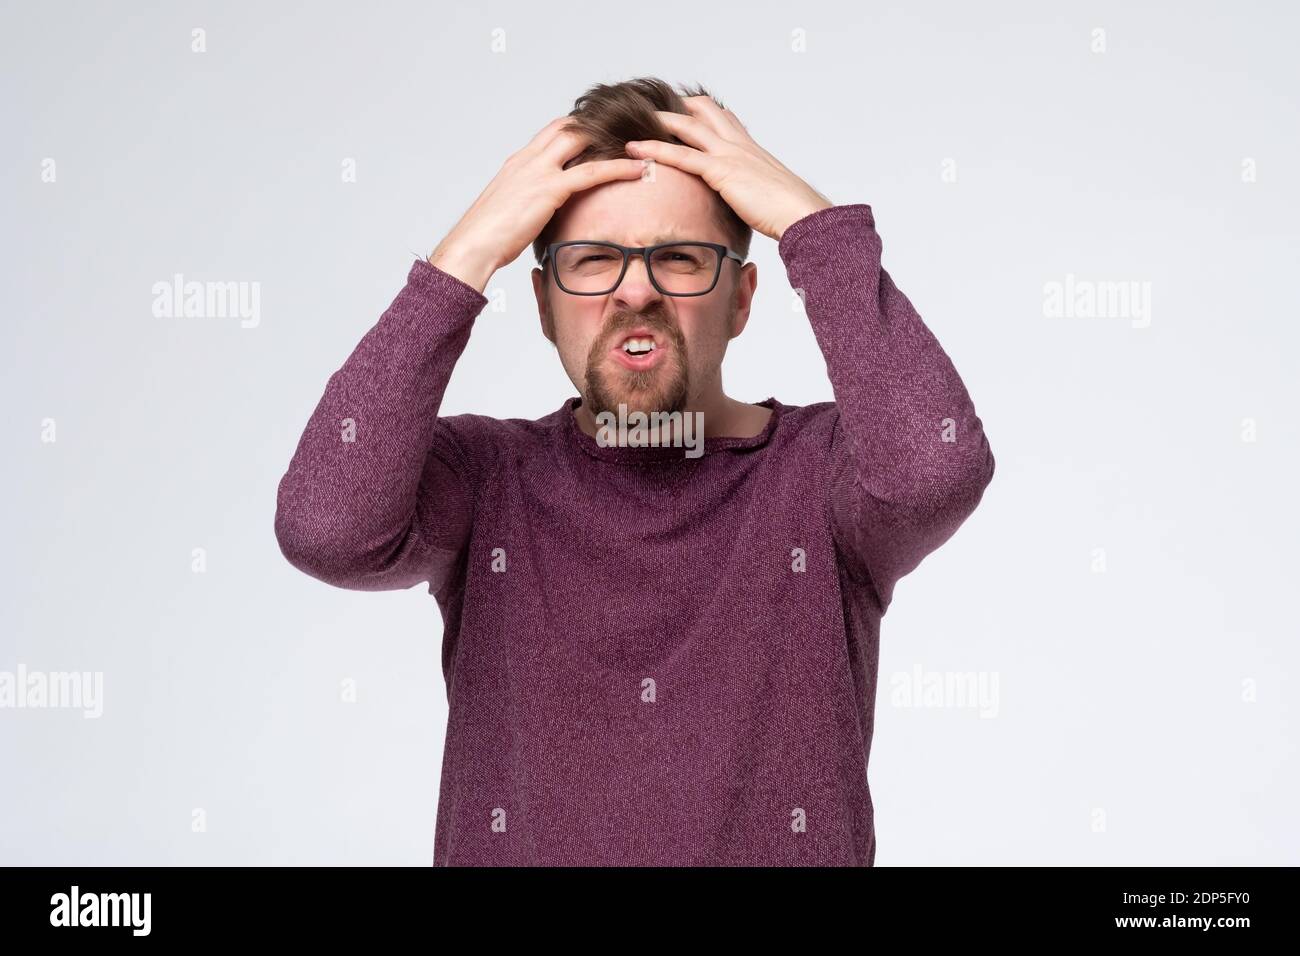 Mature caucasian man with glasses in pain and despair holding hands on head. Studio shot Stock Photo